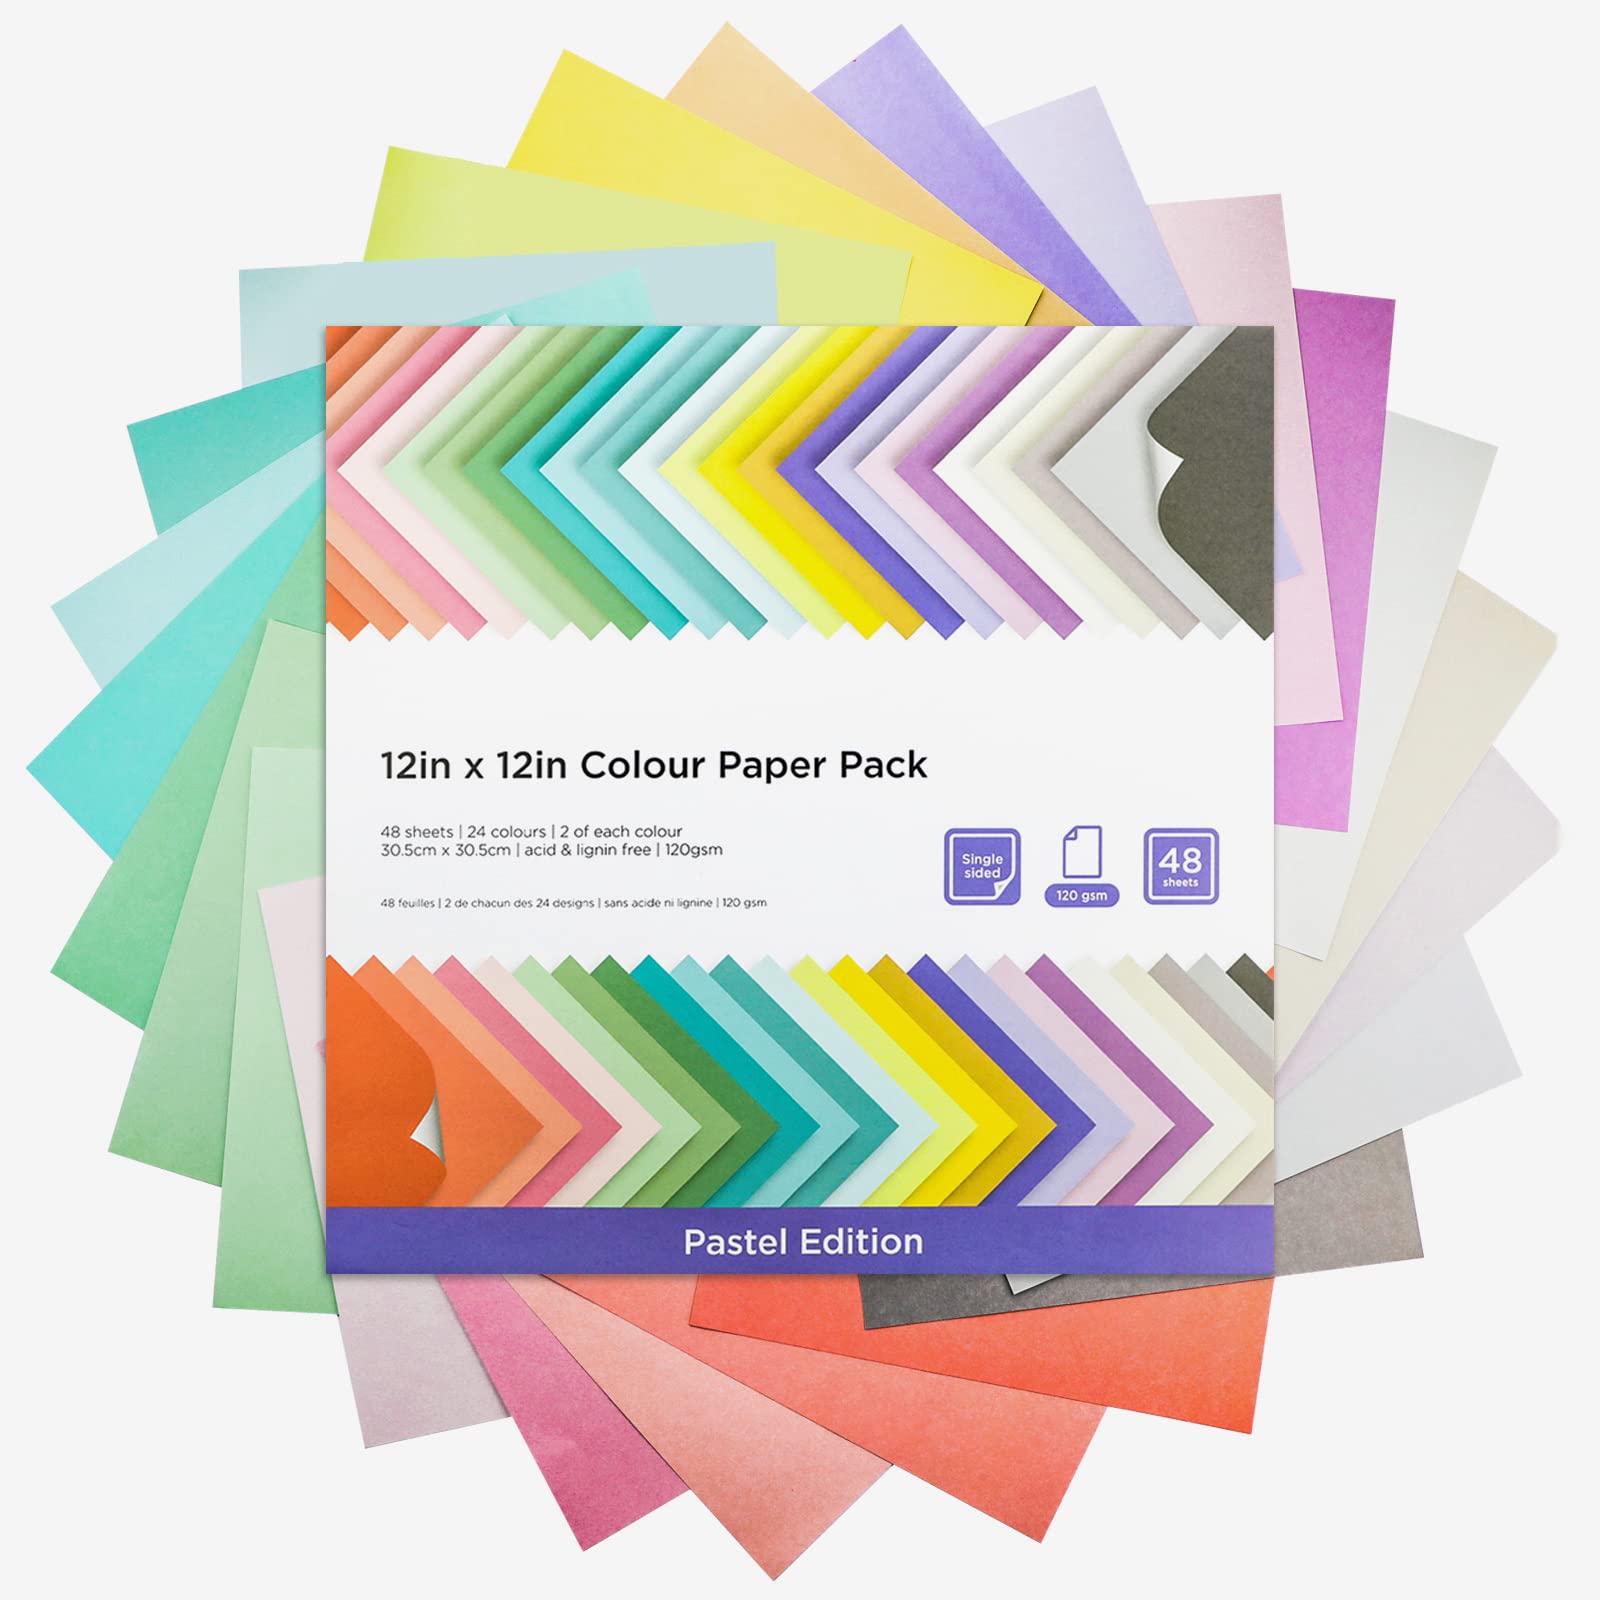 Livholic 48 Sheets Pastel Color Scrapbook Paper 12x12 Inch 24 Assorted  Colored Card stock 120gsm 32lb Rainbow Paper for Cardmaking, Assorted Color  Shading Projects,Origami,Kids Crafts Pastel Edition